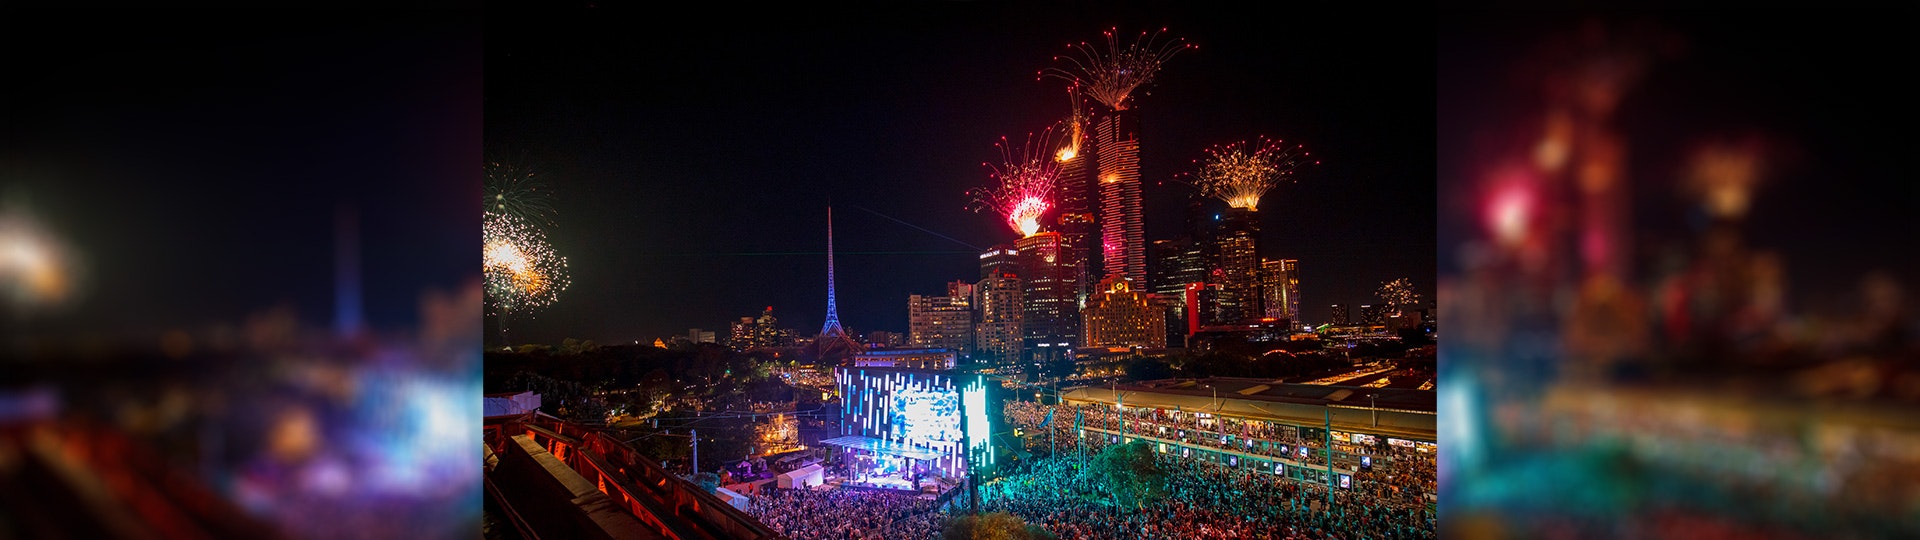 A photo from the top of a building looking down into Fed Square with the crowd watching the big screen. Fireworks can be seen coming off buildings to the south in the distance